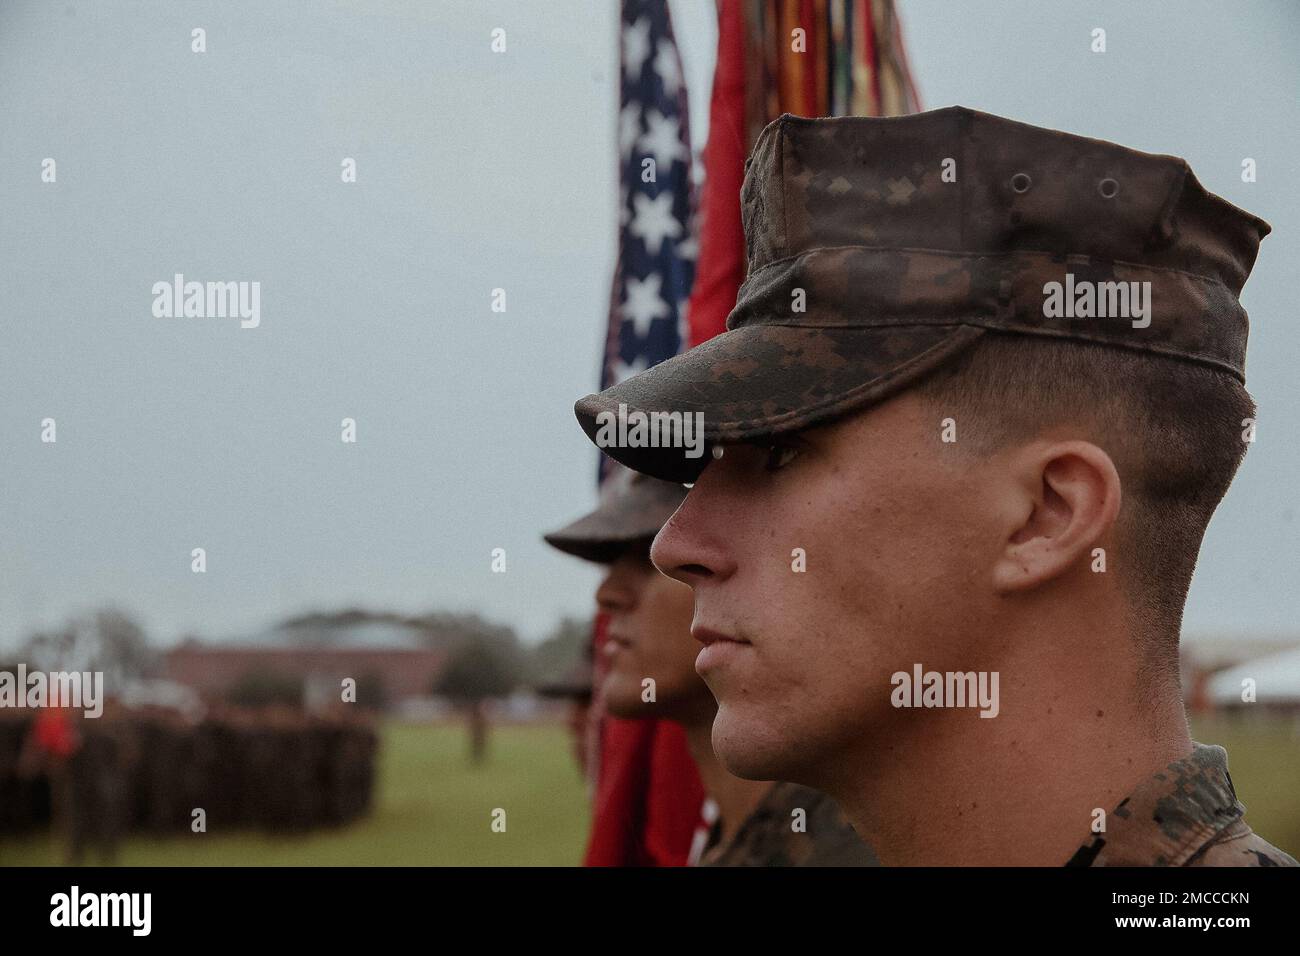 U.S. Marines with 6th Marine Regiment, 2d Marine Division, stand at attention at a change of command ceremony on Camp Lejeune, North Carolina, June 29, 2022.  During the ceremony, Col. Jeffrey R. Kenney, the outgoing regimental commander of 6th Marines, relinquished command to Col. Gregory P. Gordon. Stock Photo